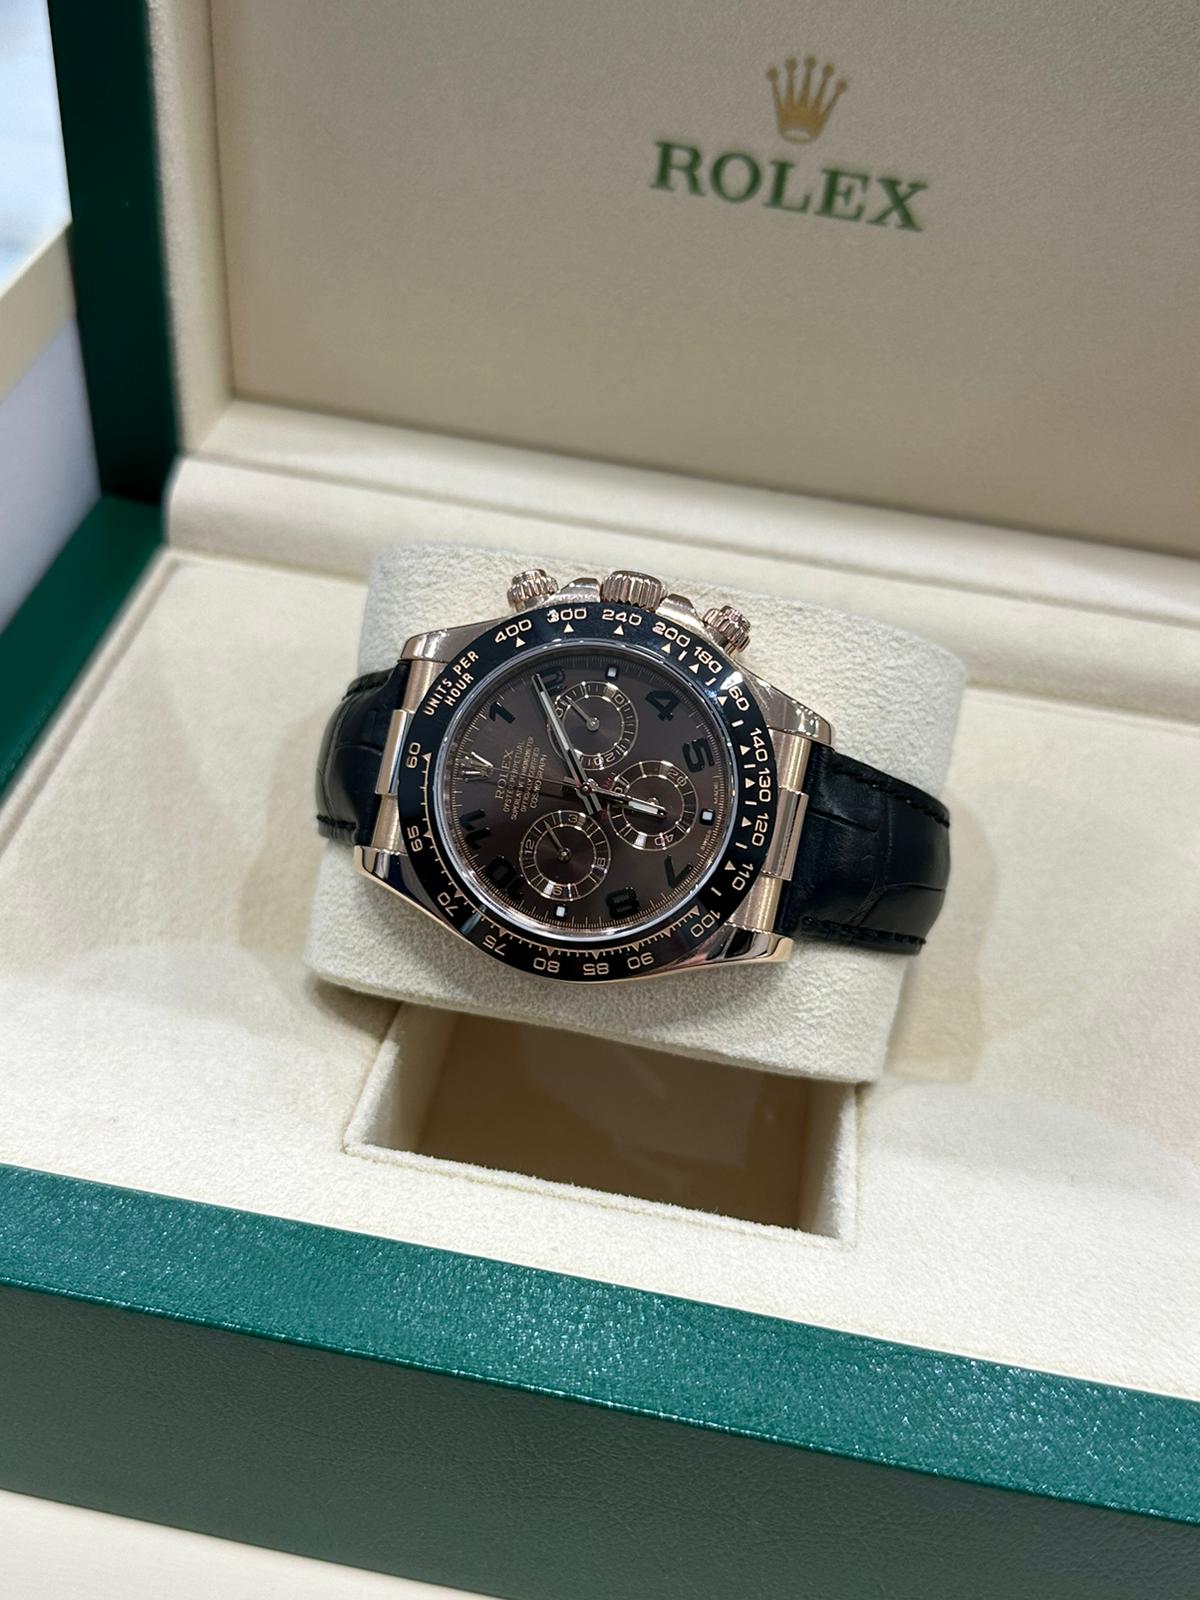 Rolex Daytona Chocolate with Leather bracelet 116515LN 2013 with box and papers. - Image 5 of 8